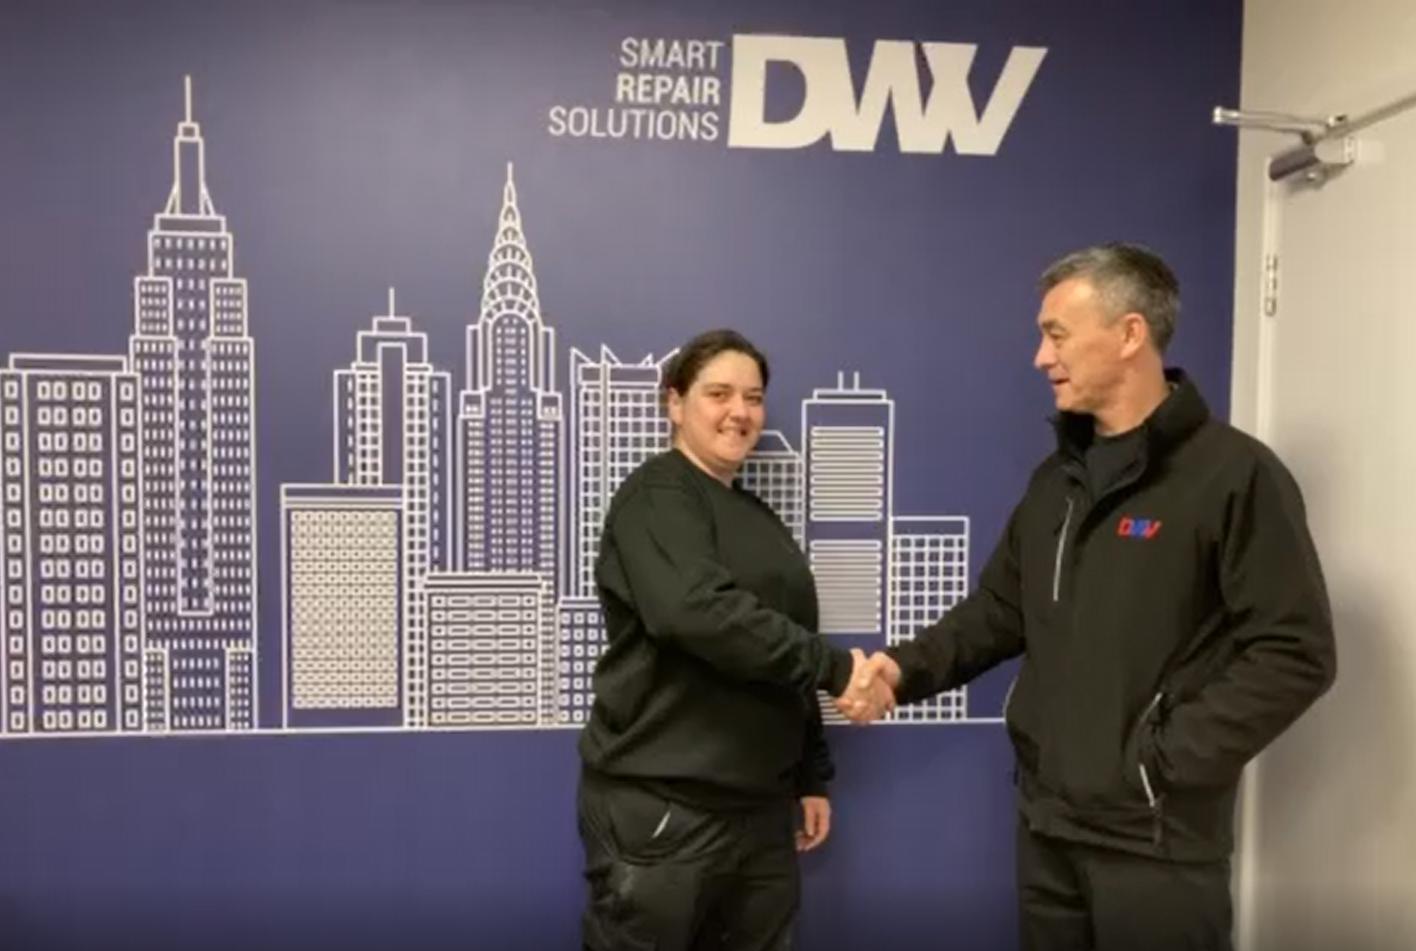 DWV welcomes new Technicians to the team